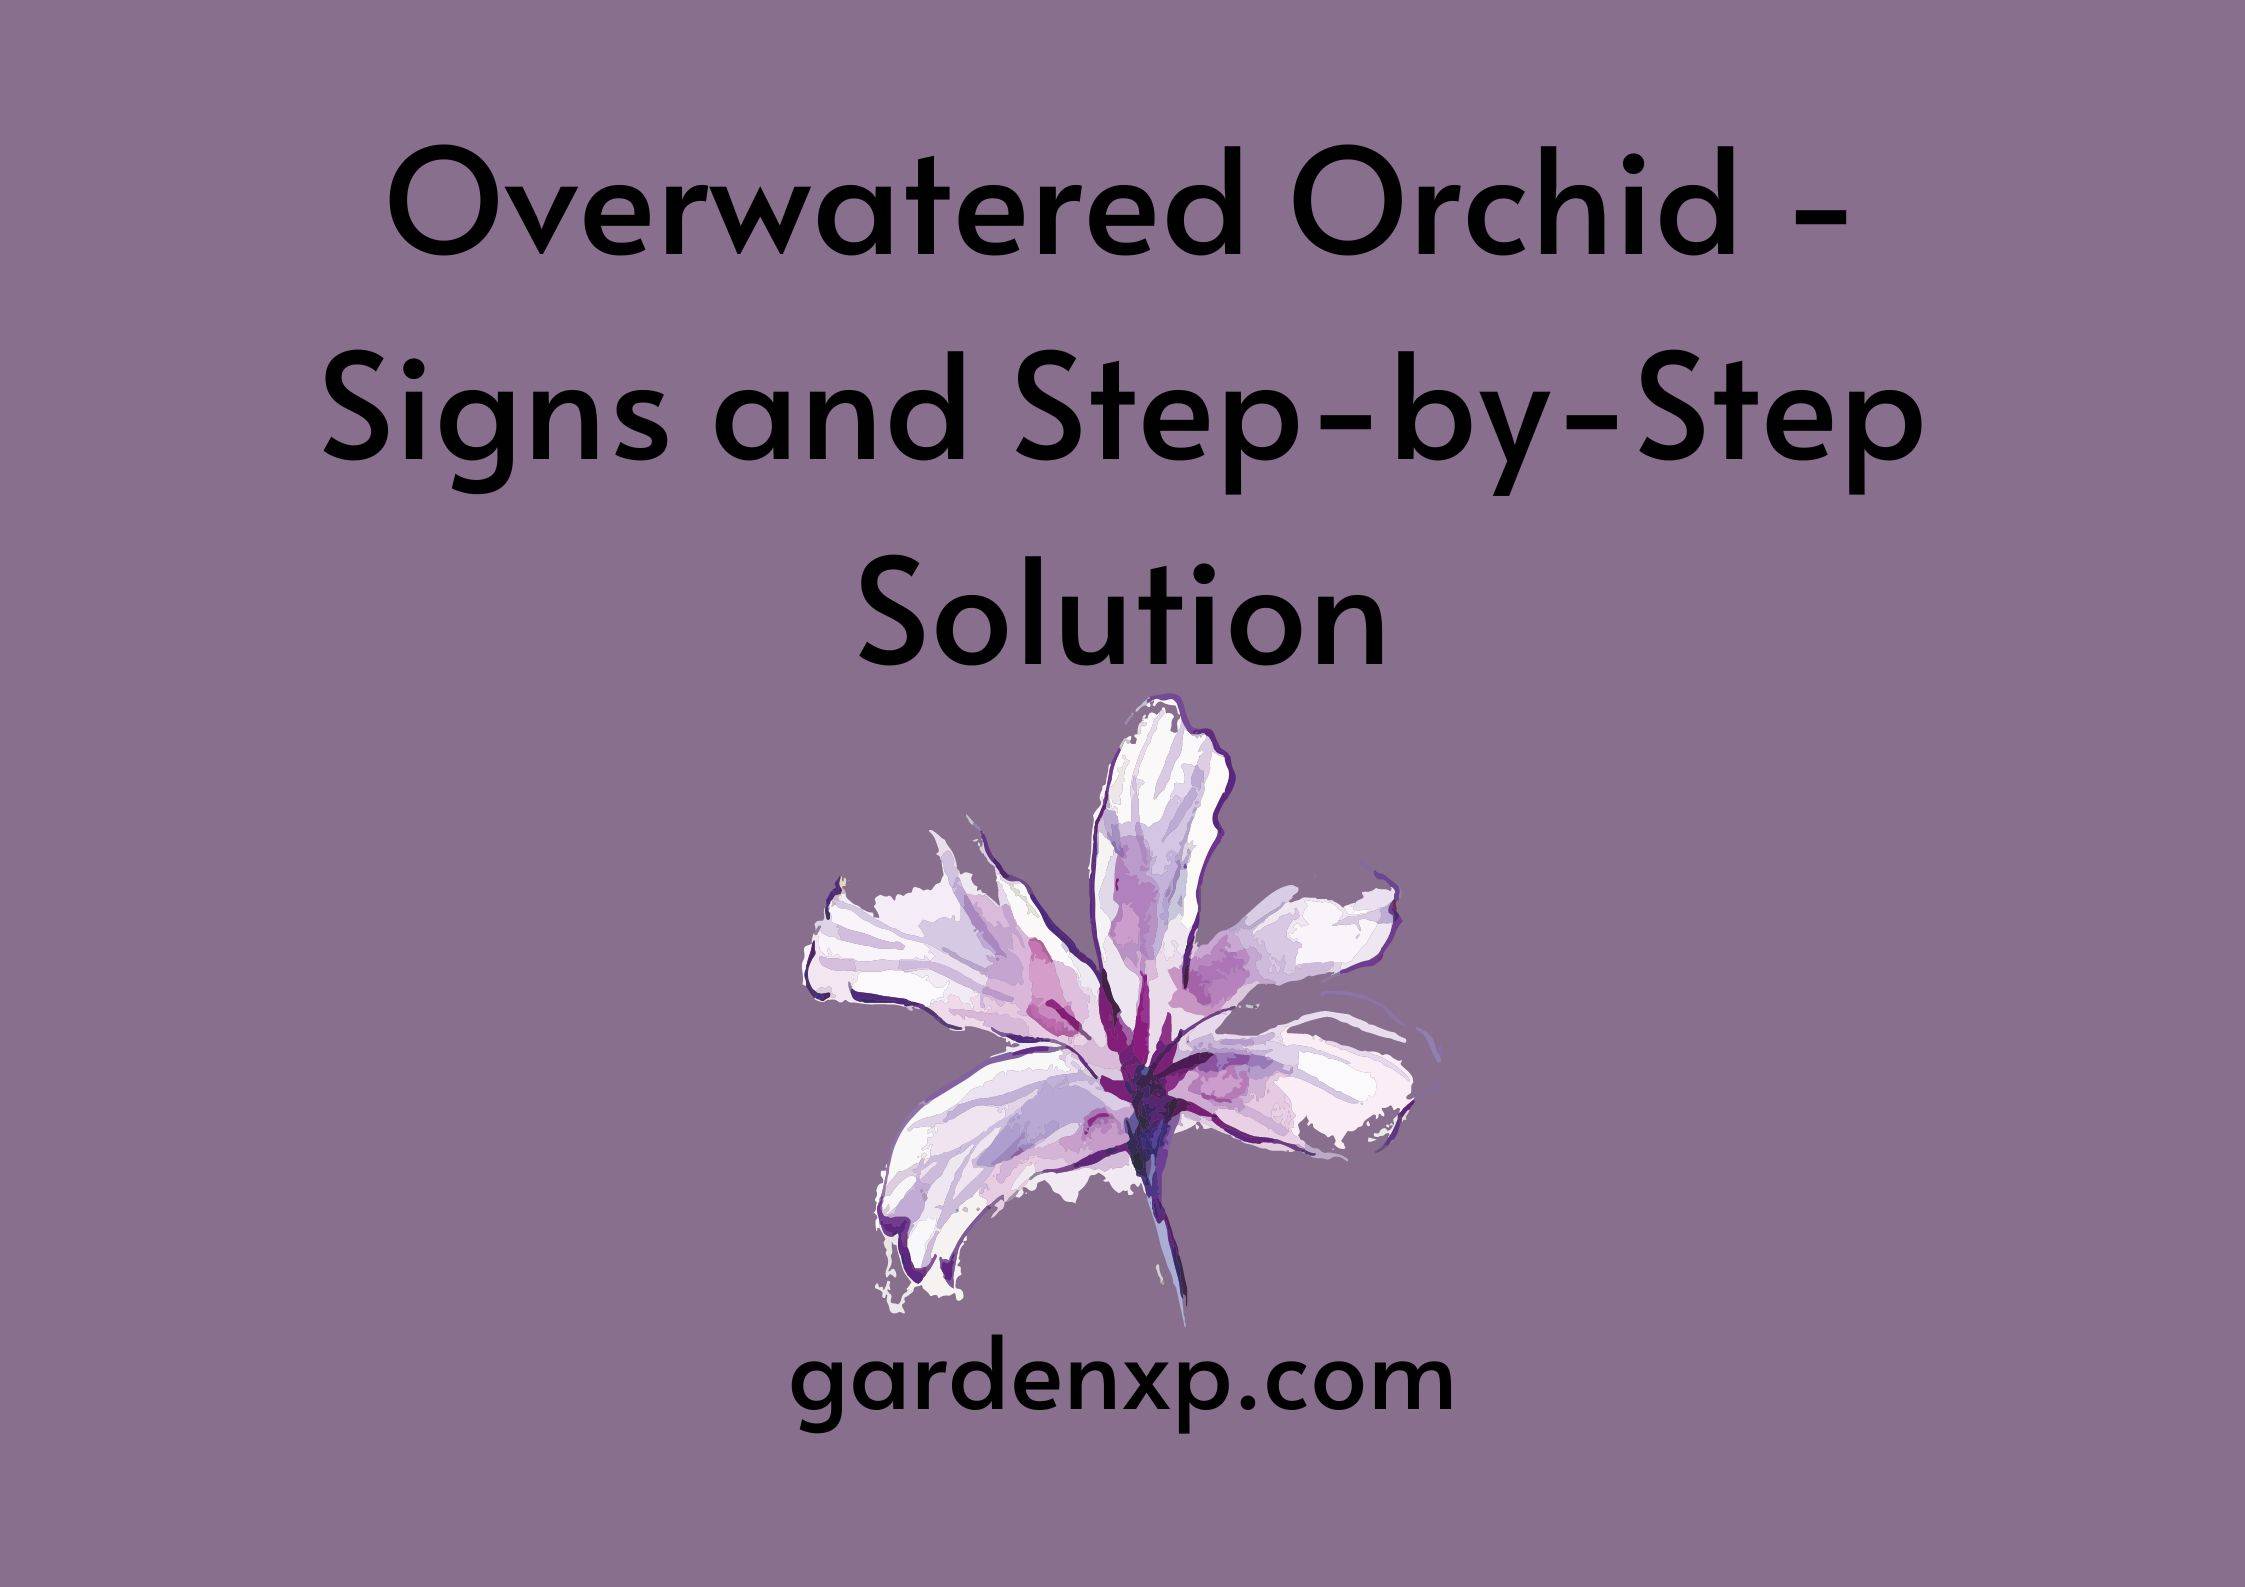 Overwatered Orchid - Signs and Step-by-Step Solution